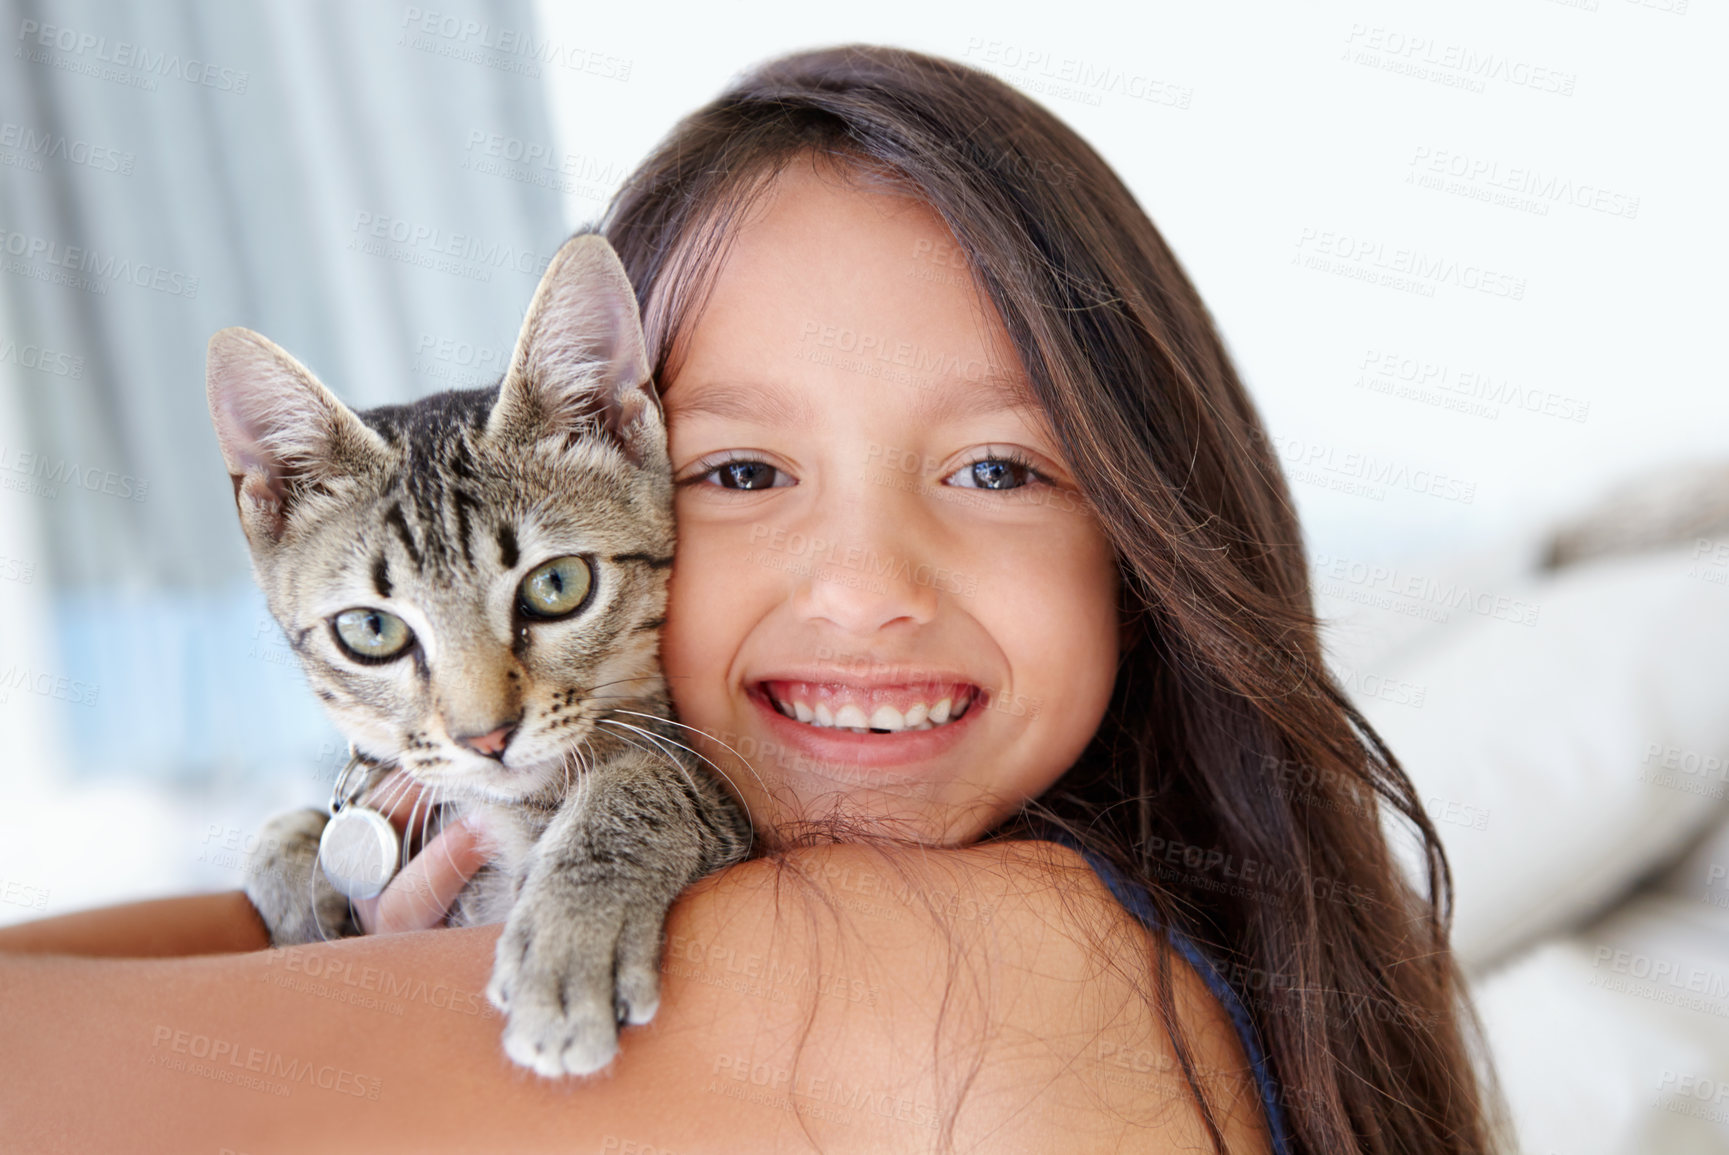 Buy stock photo Smile, cat and portrait of child at her home cuddling, hugging and bonding with her animal. Happy, love and face of young girl kid embracing her kitten pet with care in living room of family home.